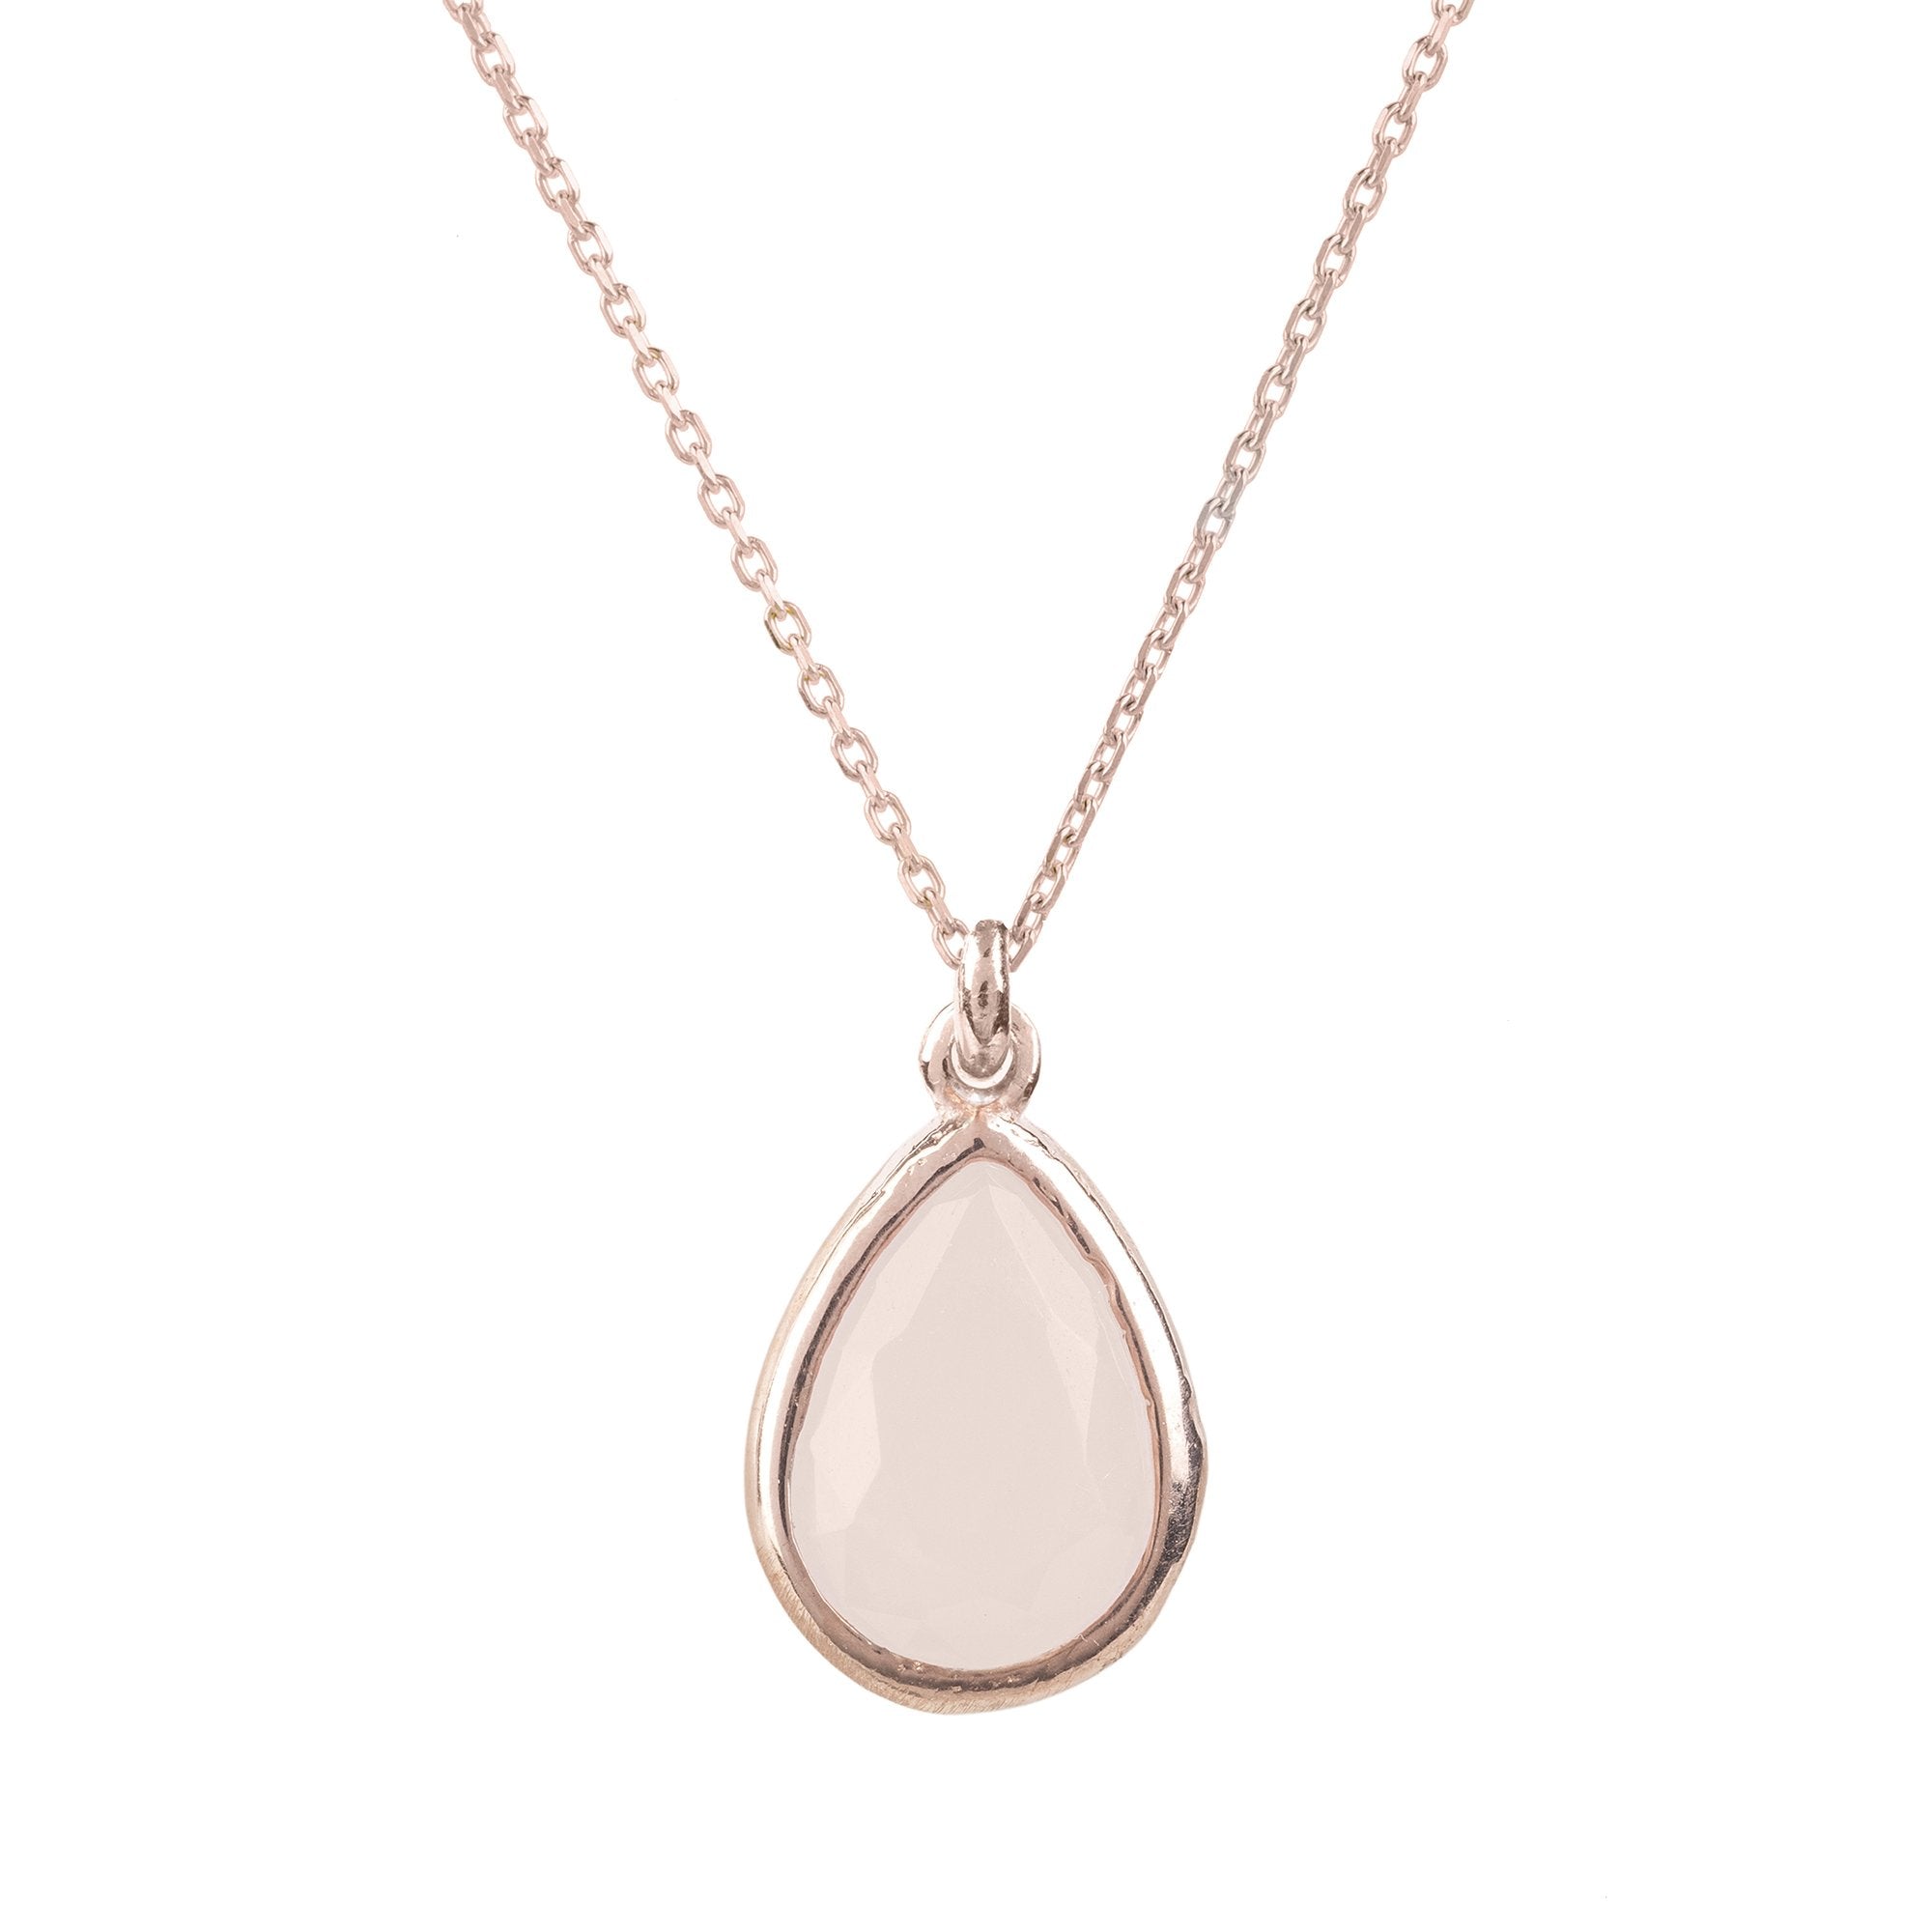 Rose Quartz Teardrop Necklace - Capri Collection, 925 Sterling Silver, 22ct Rosegold Finish, Ideal Gift, Birthstone Jewelry - Accessories - Bijou Her -  -  - 